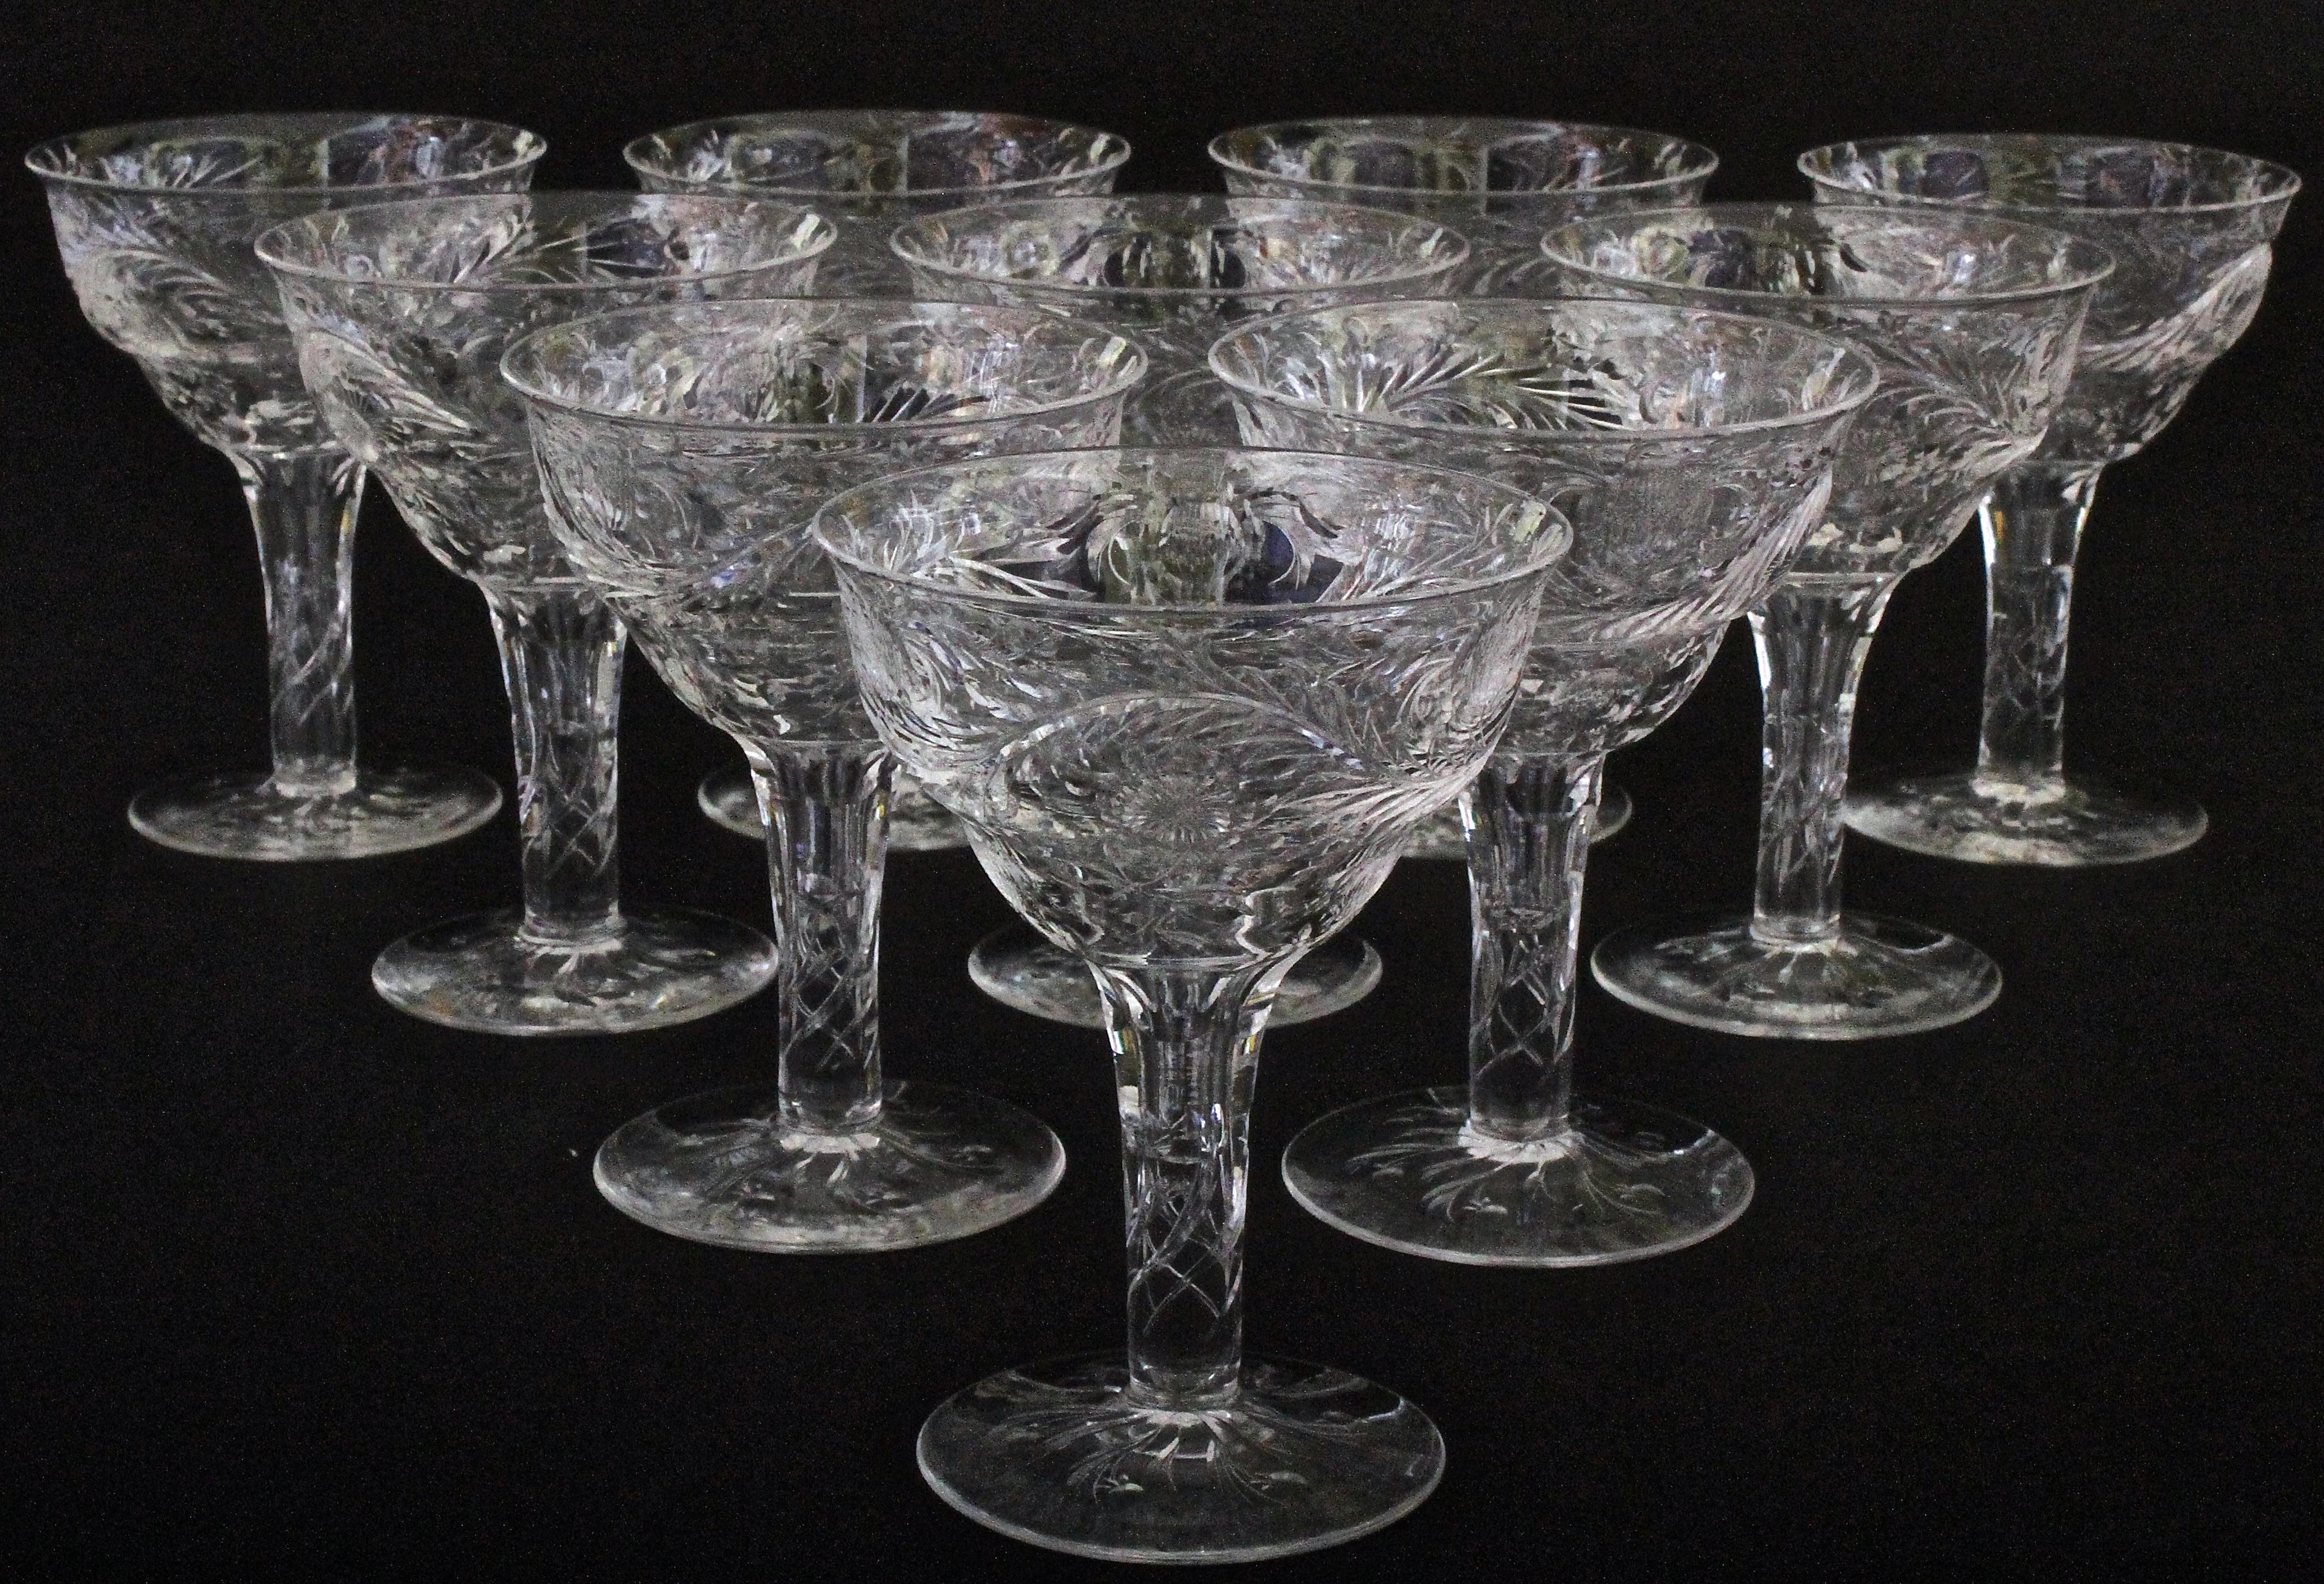 Here are 10 exceedingly rare hollow-stem rock crystal style champagne coupes by the distinguished English maker Thomas Webb. The coupes are hand-blow and wheel-cut in a lovely Art Nouveau flowing leaf and floral design. The hollow stem is an